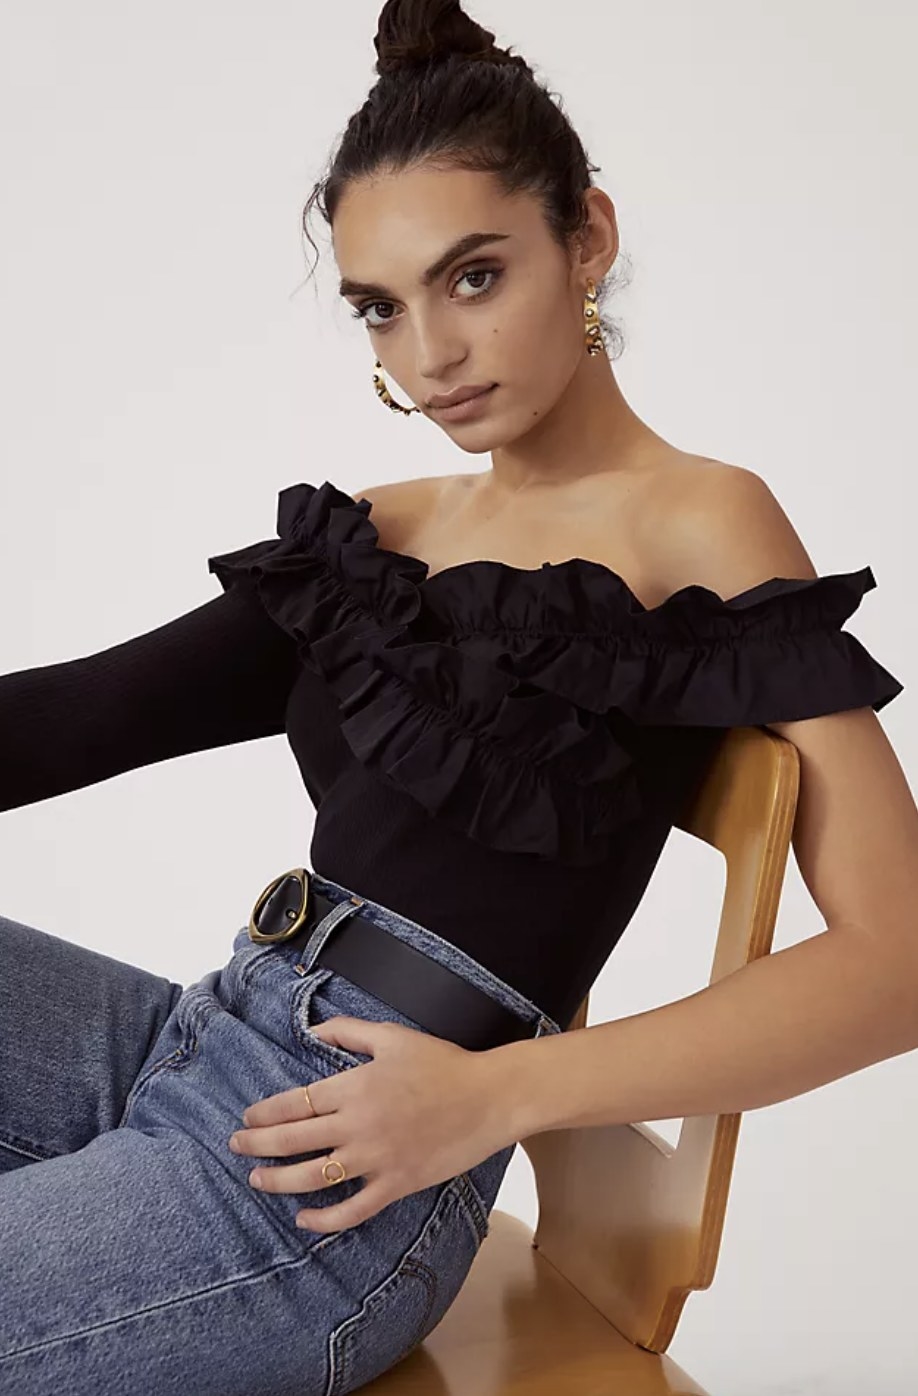 An adult wears the off-the-shoulder top with black ruffles around the neckline and one long sleeve while the other stops around the shoulder